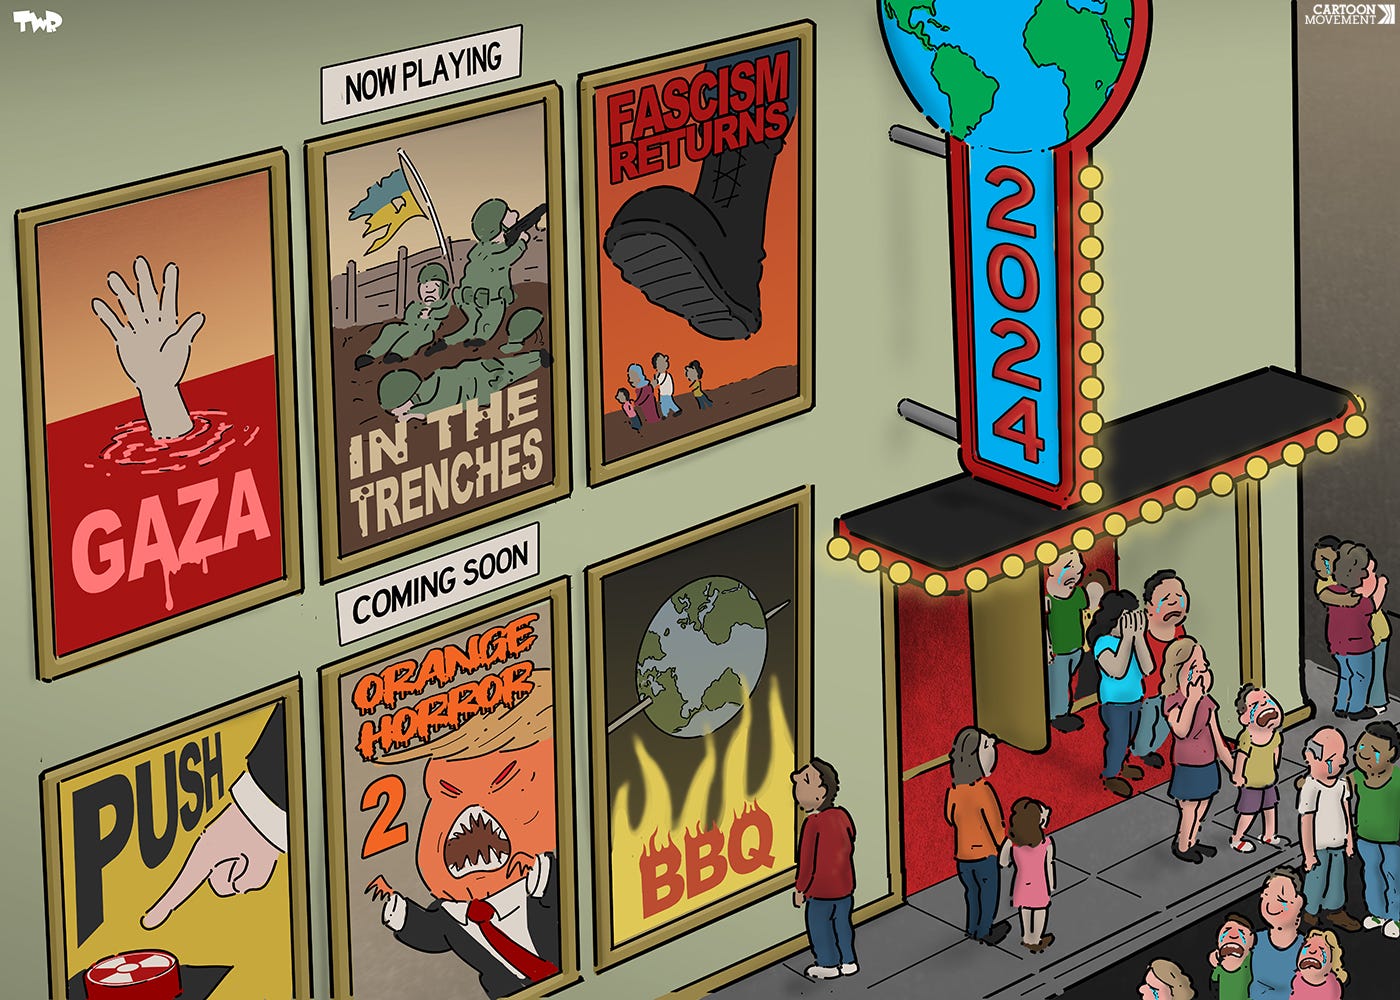 Cartoon showing the outside of a cinema titled '2024'. Movie posters decorate the wall, showing what is playing now and what is coming soon. The posters are titled Gaza (a hand sticking out of a sea of blood), In the trenches (showing exhausted Ukrainian soldiers in a trench), Fascism returns (showing a giant boot stomping on refugees), Push (showing a finger about to push a nuclear button), Orange horror 2 (showing a monster in the shape of Trump) and BBQ (showing the earth being roasted). The people who a